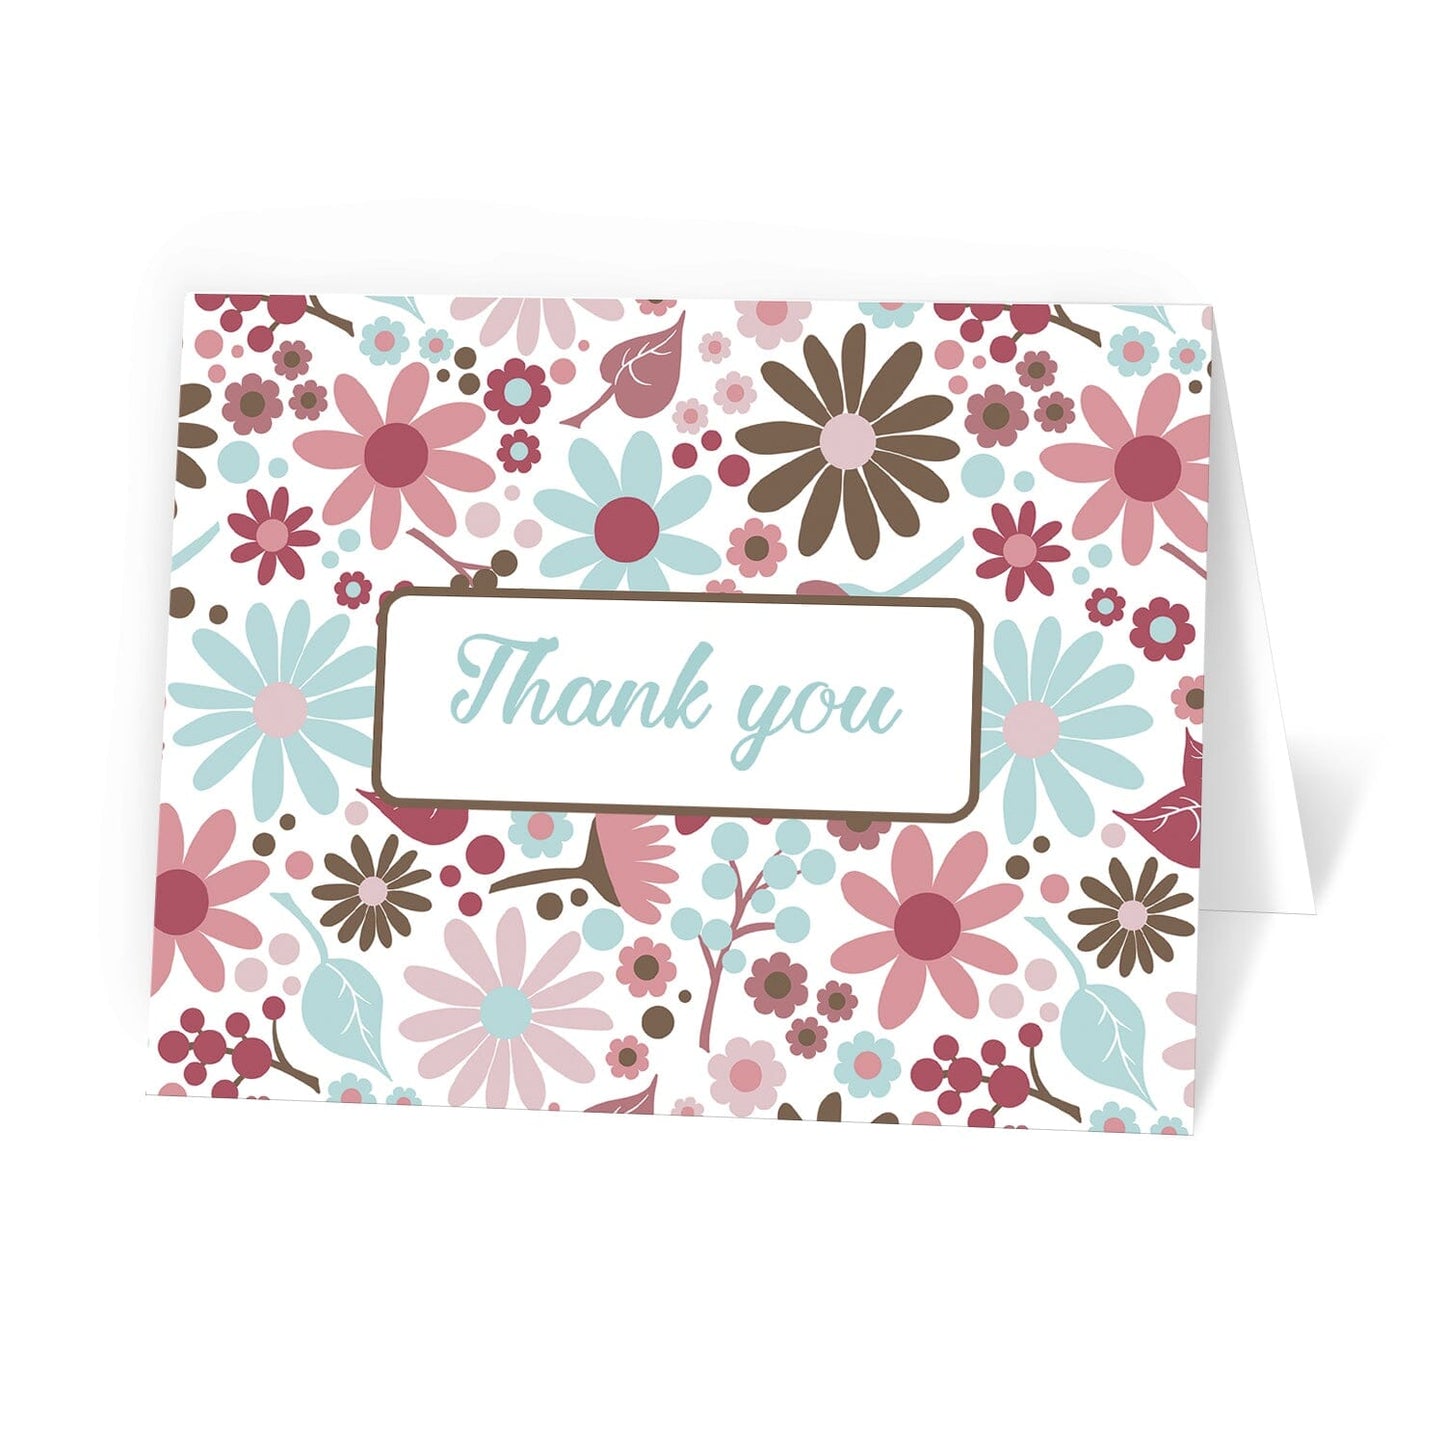 Berry Blue Summer Flowers Thank You Cards at Artistically Invited.